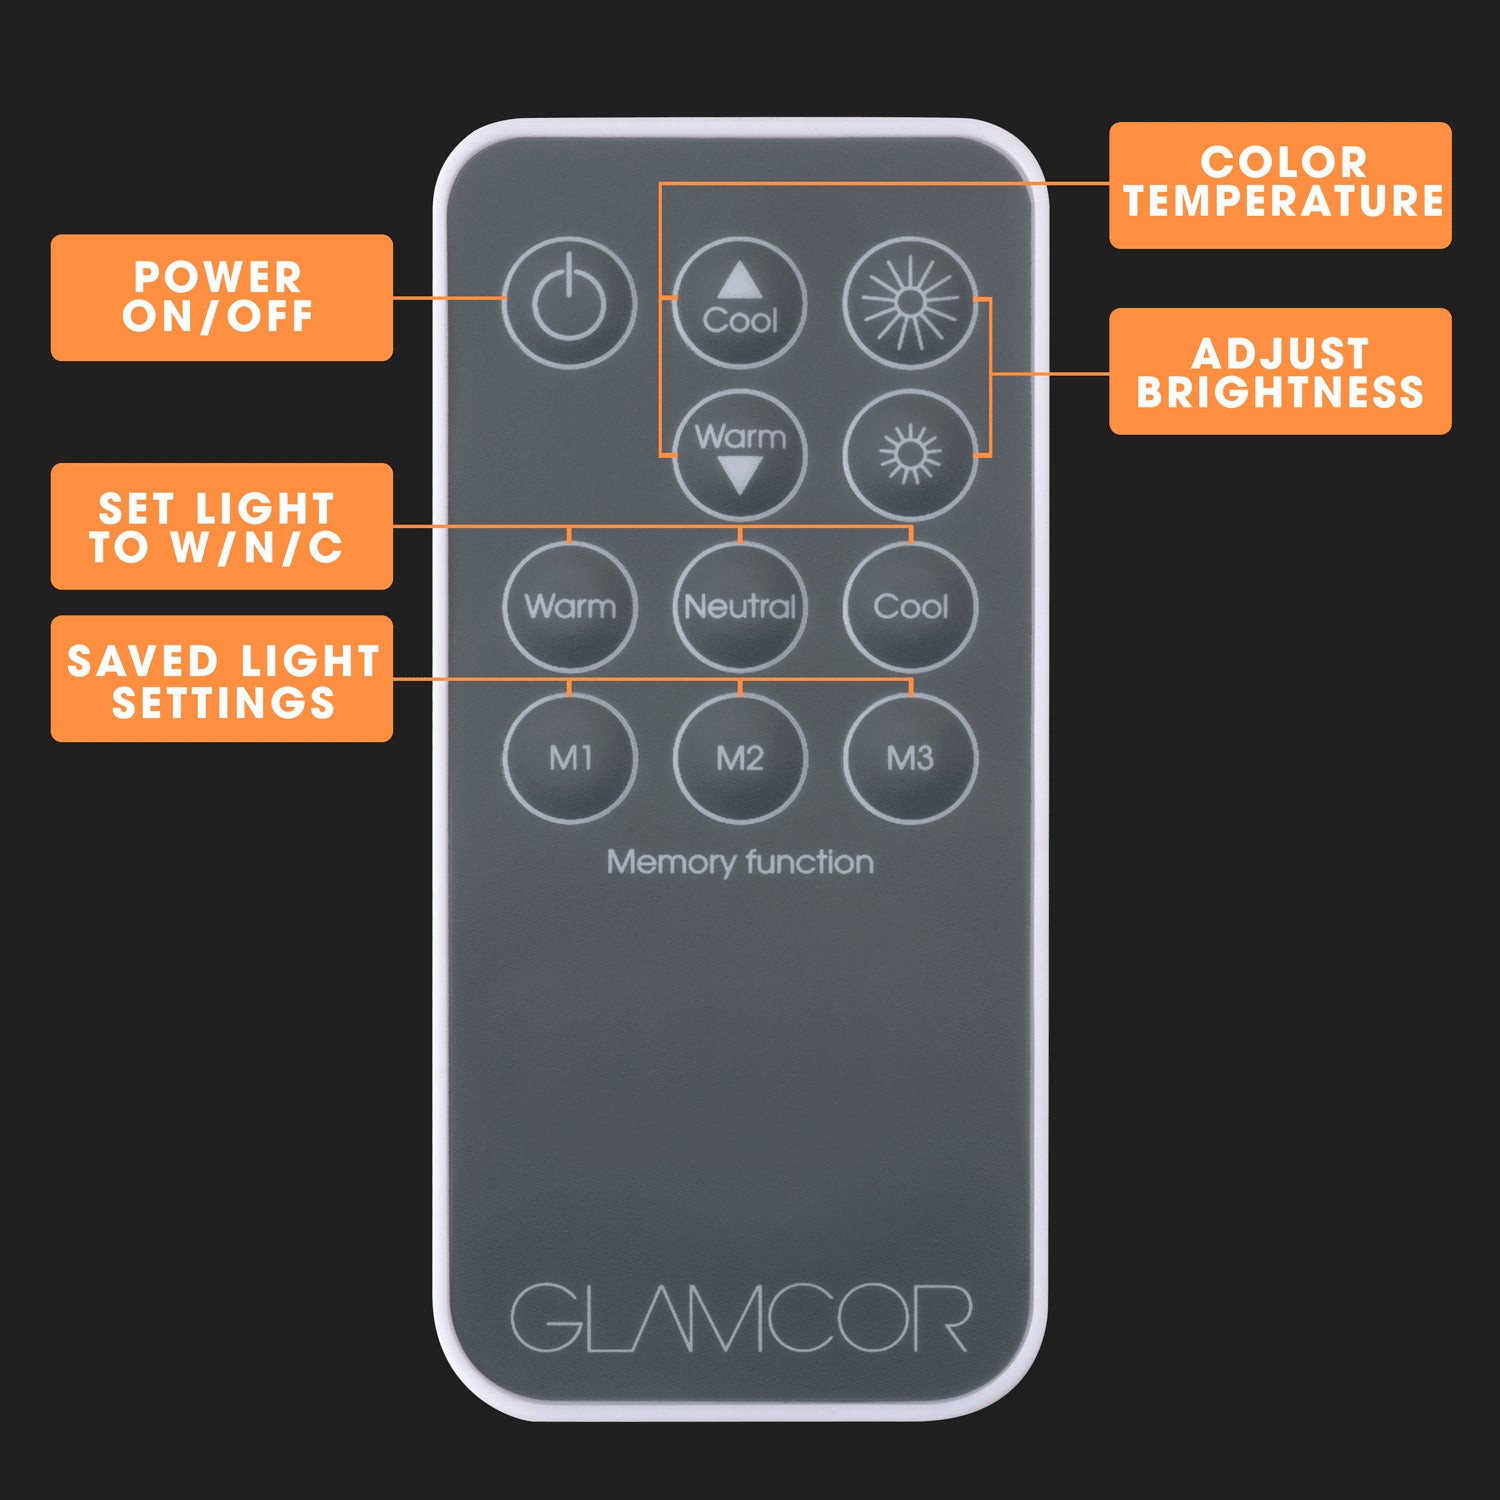 Ultra X Remote Control Replacement - GLAMCOR REPLACEMENTS GLAMCOR